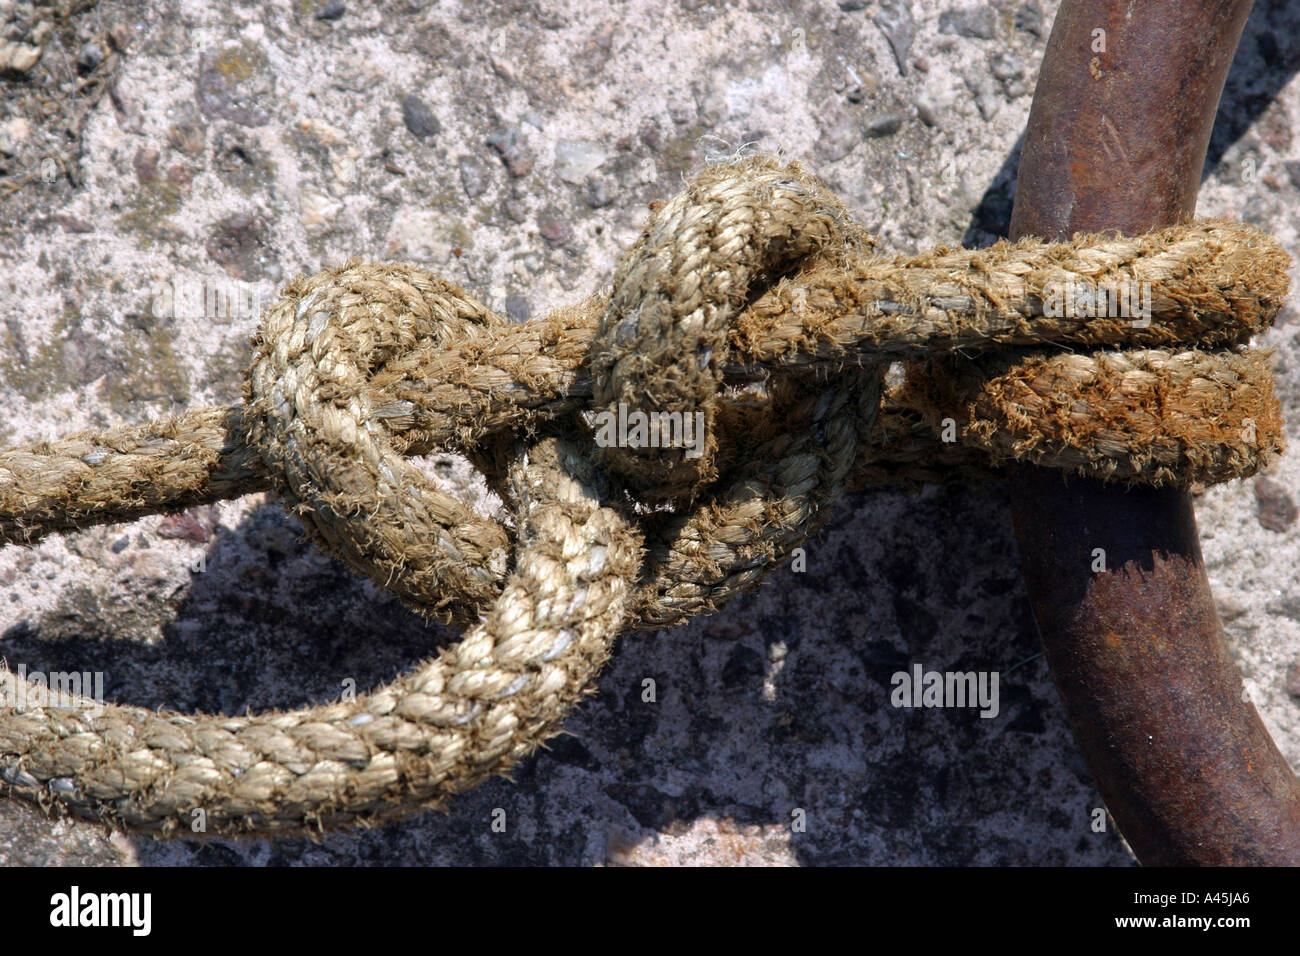 Fishermans knot in a rope connected to a rusty ring Stock Photo